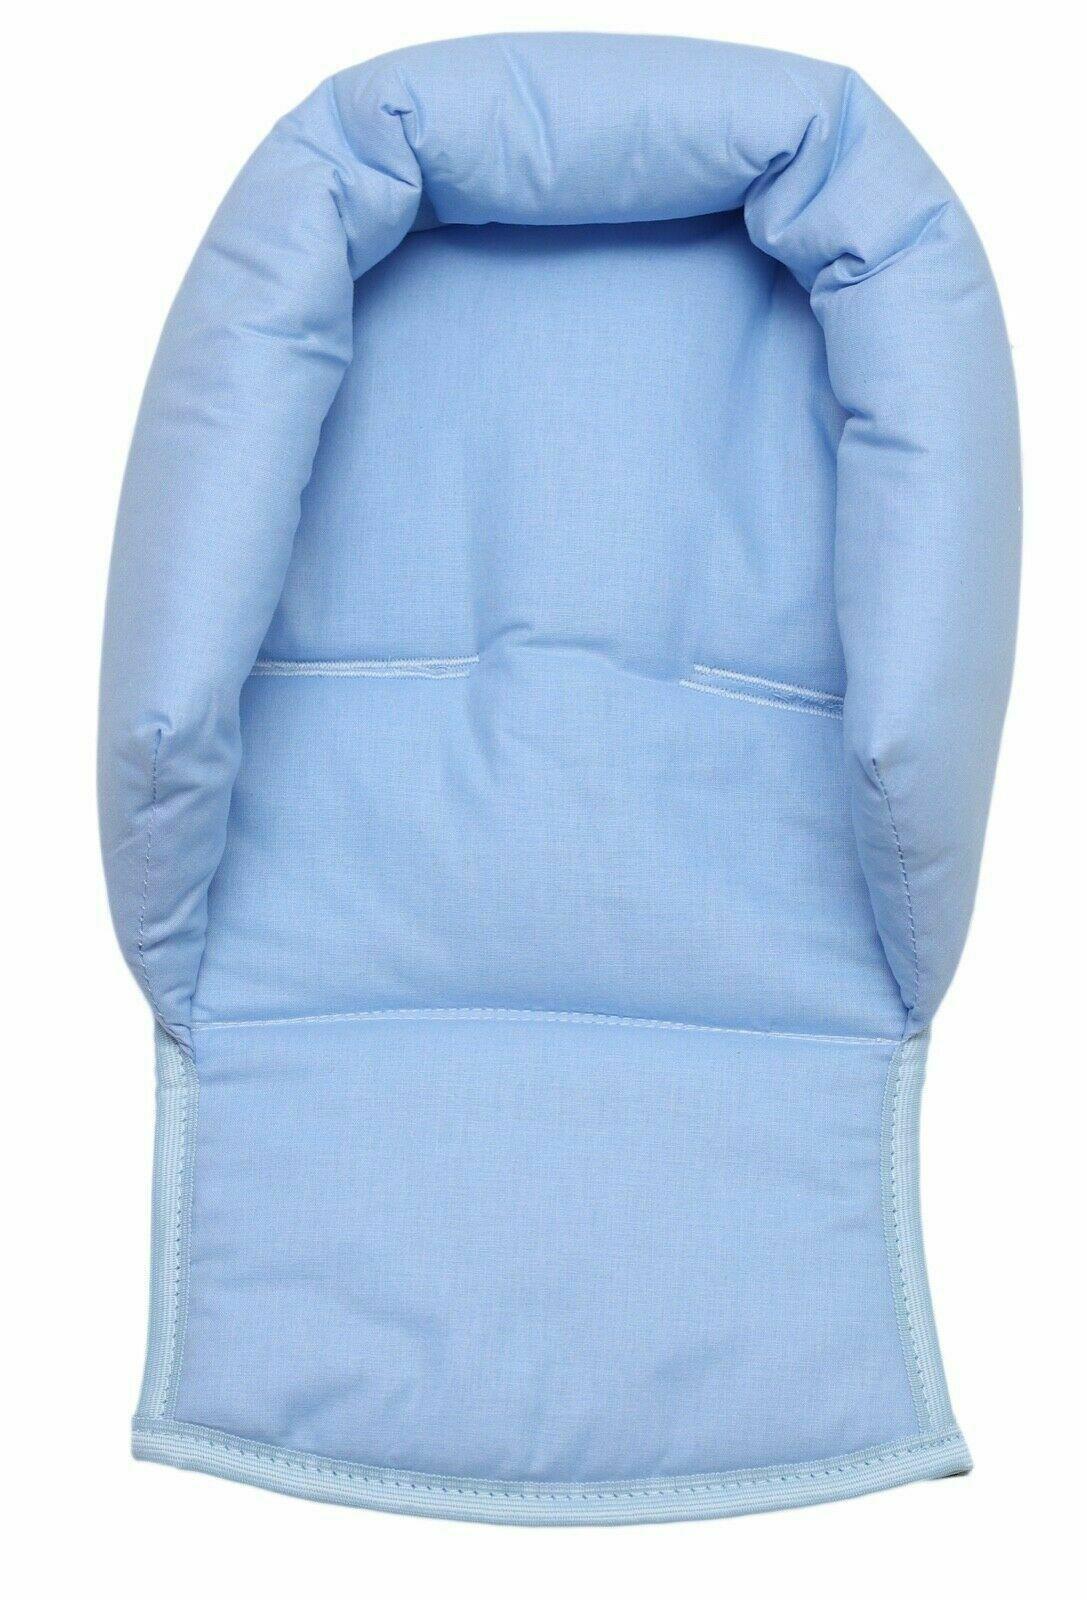 Baby Head Car Seat Rest Cushion Toddler Child Support Pillow Light Blue